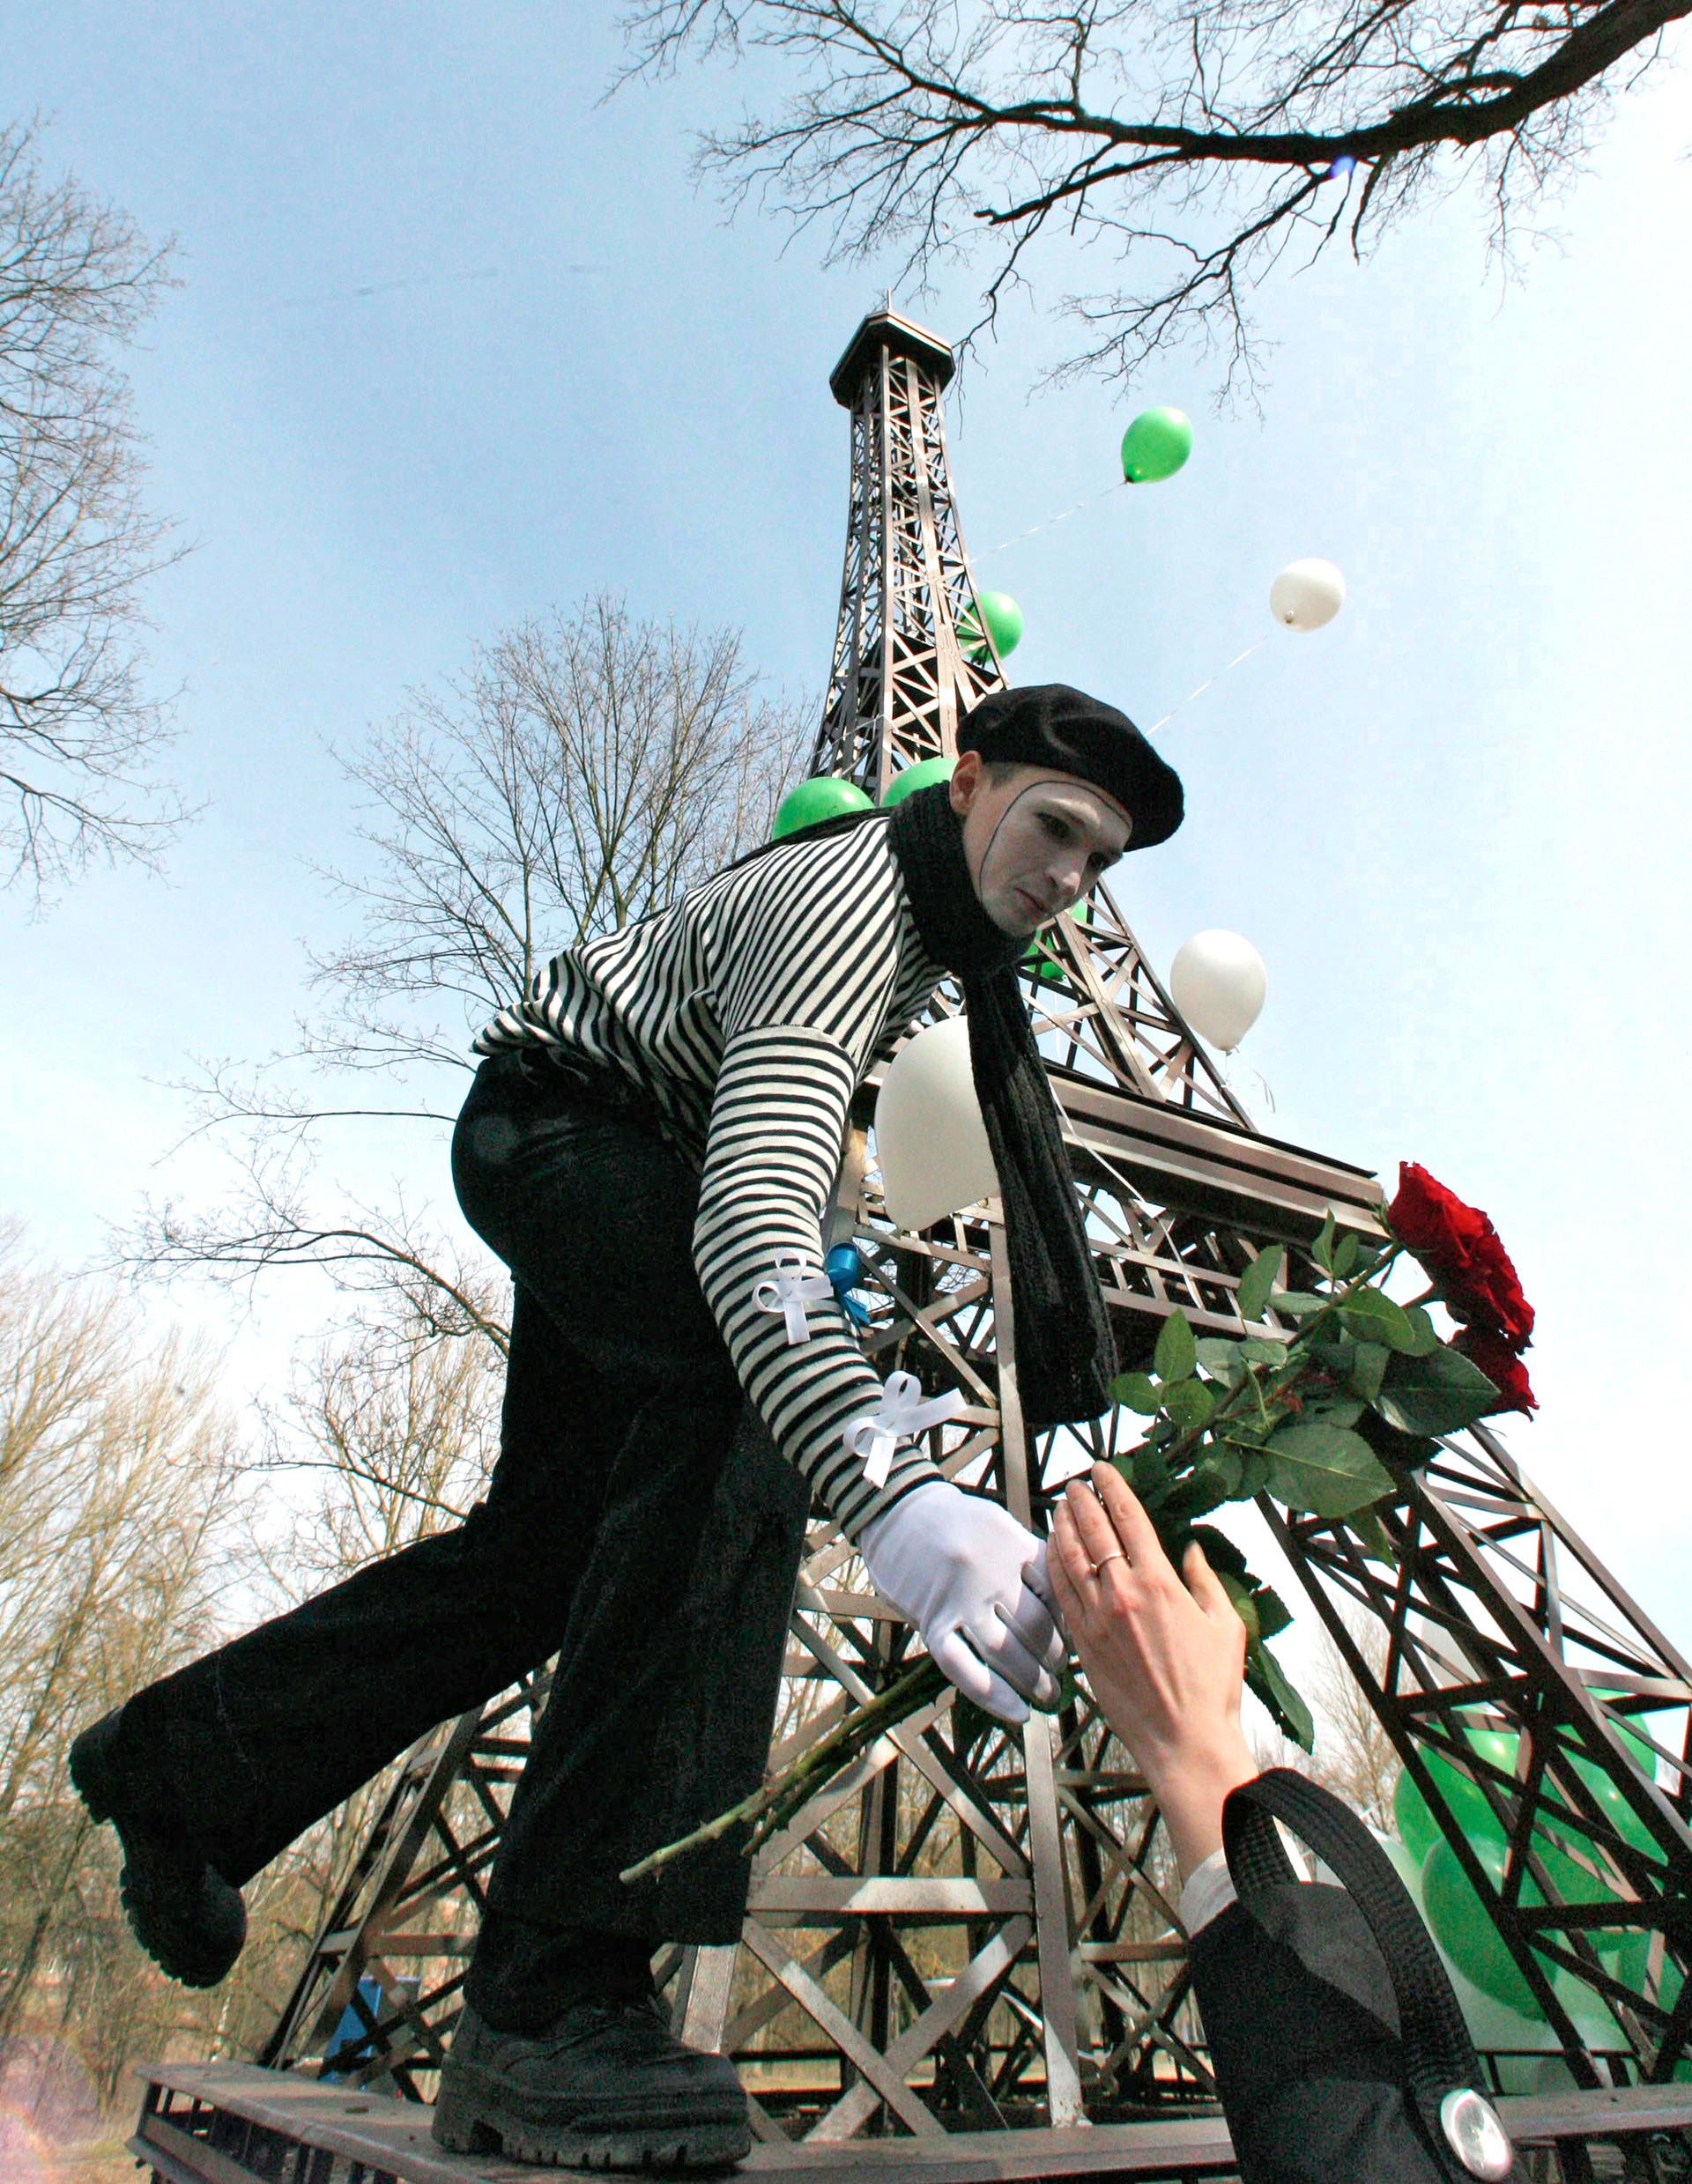 Outdoor festivities to mark the 120th anniversary of the Eiffel Tower near its 8-meter-tall copy in the town park of Gusev, Kaliningrad Region.